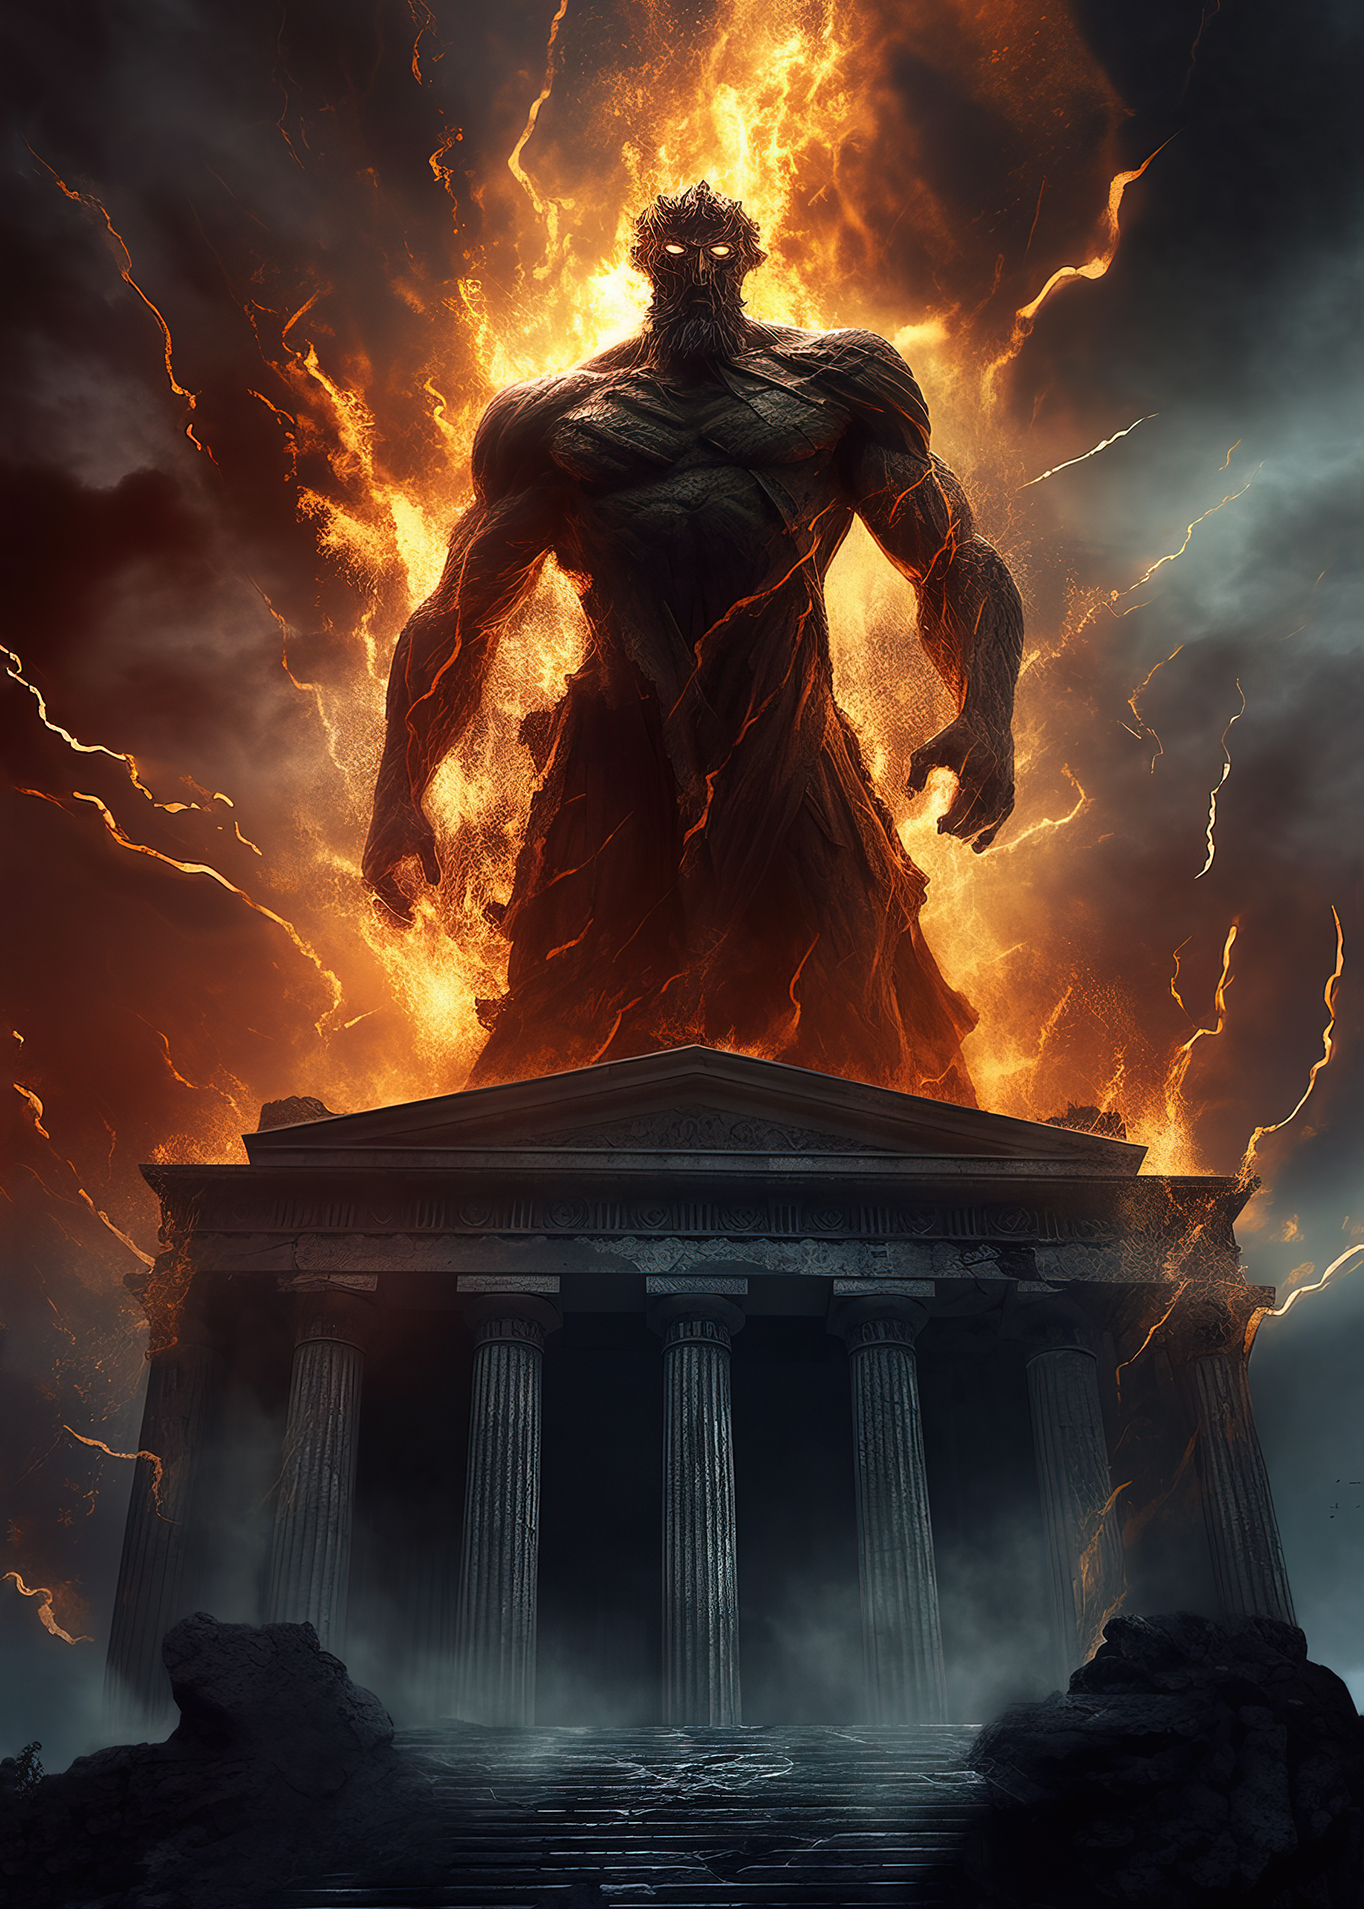 Plunge into the thrilling realm of Greek mythology with this mesmerizing digital art print featuring Hades, the god of the underworld. Engulfed in battle and surrounded by a searing fire, Hades stands dominant above the iconic Parthenon, a symbol of his defiance and power. This high-quality digital illustration masterfully captures the daunting aura of Hades in the heat of battle, while the backdrop of the Parthenon adds a touch of ancient grandeur. The vivid colors and intricate details create an intense, dynamic scene, perfect for mythology enthusiasts or those seeking to infuse their space with the aura of ancient legends.